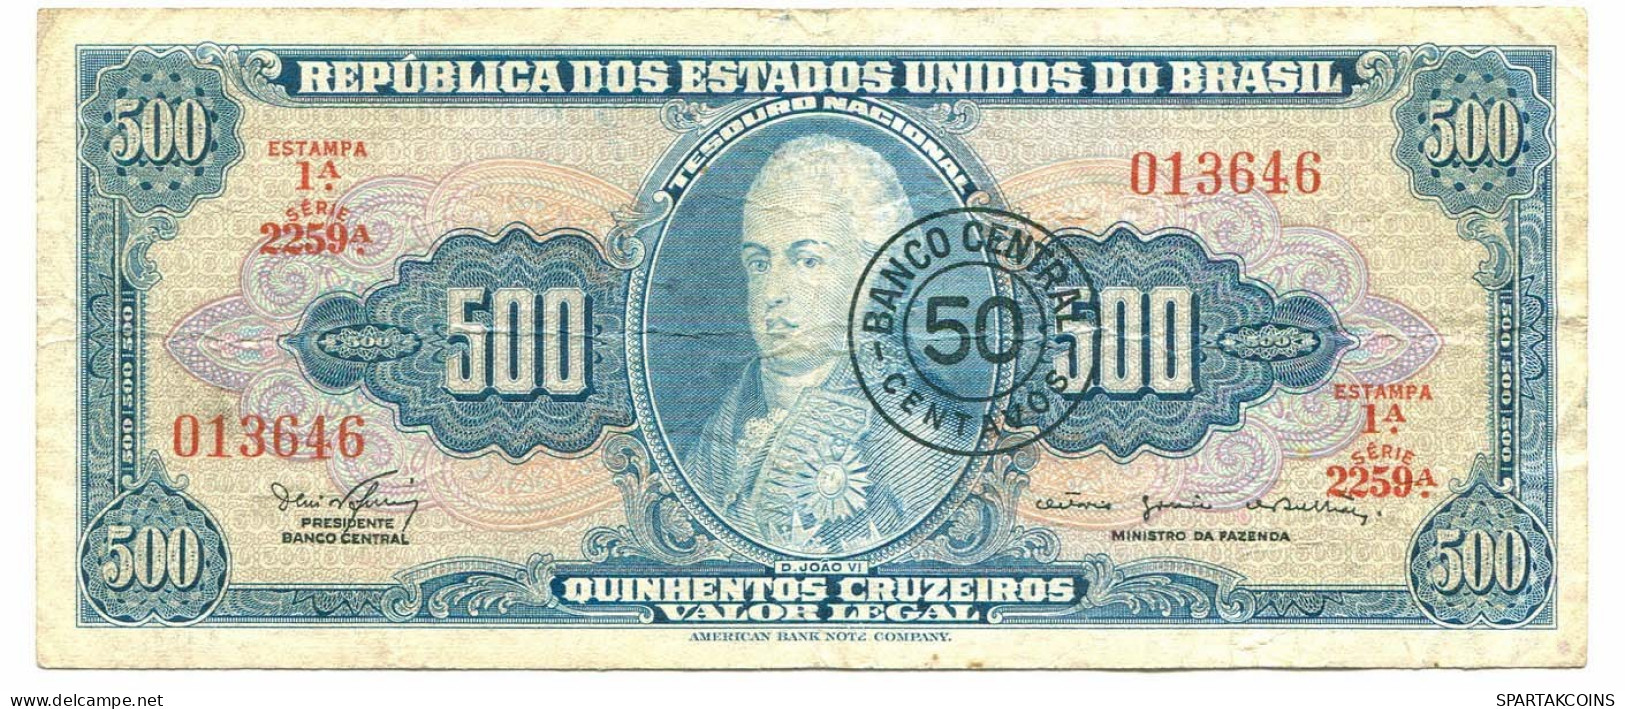 BRASIL 500 CRUZEIROS 1960 SERIE 1195A Paper Money Banknote #P10863.4 - [11] Local Banknote Issues